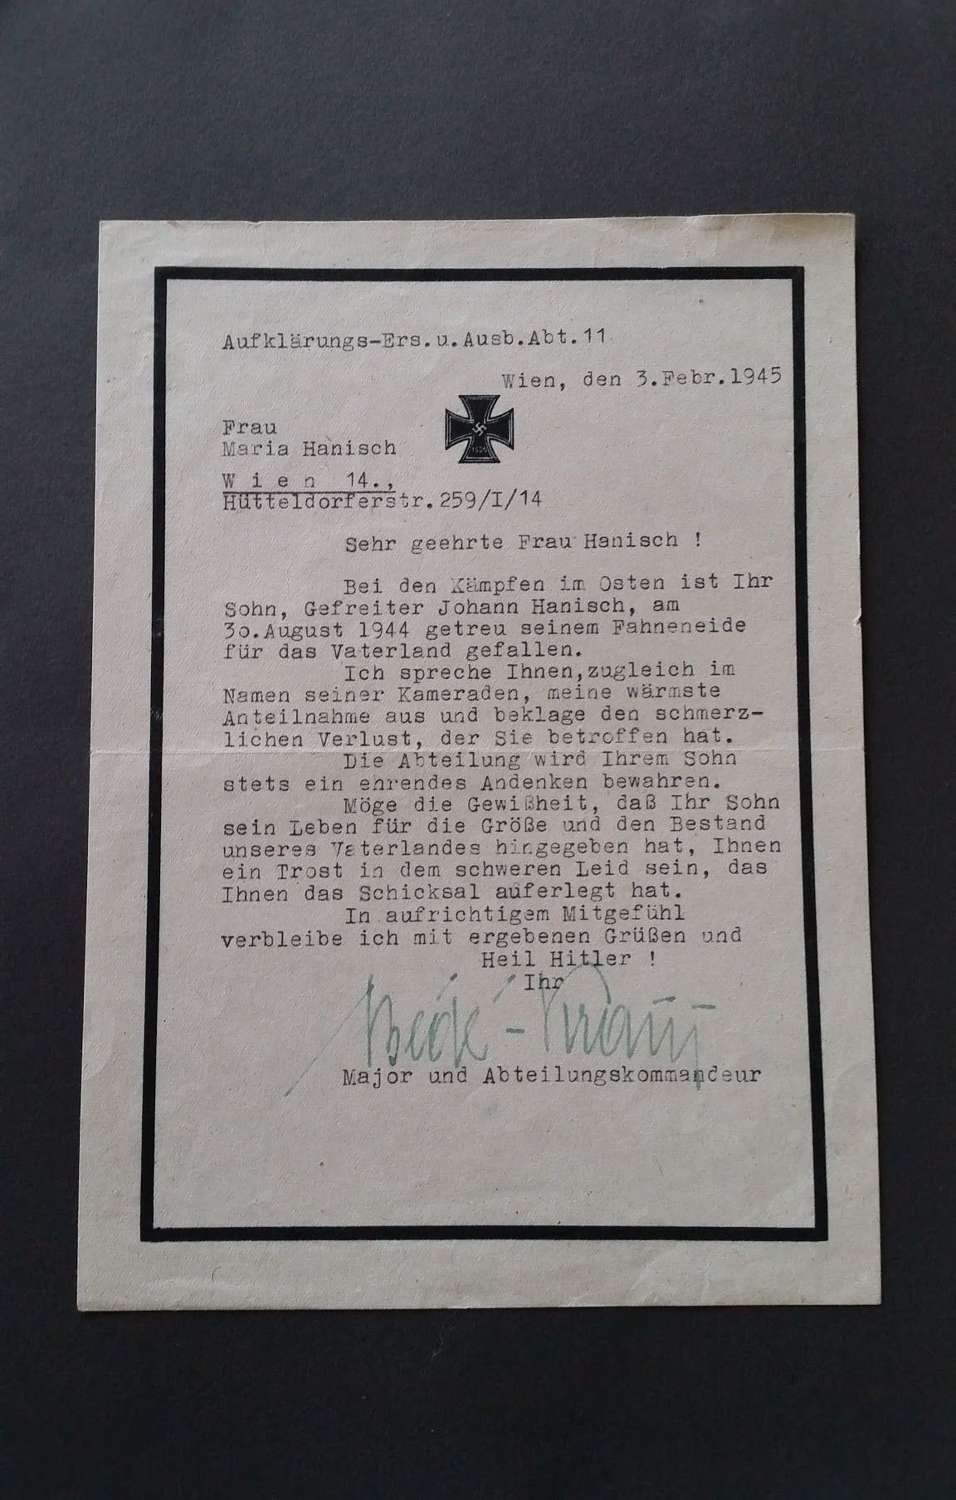 Reich Death Notification Letter and Military Memory Card